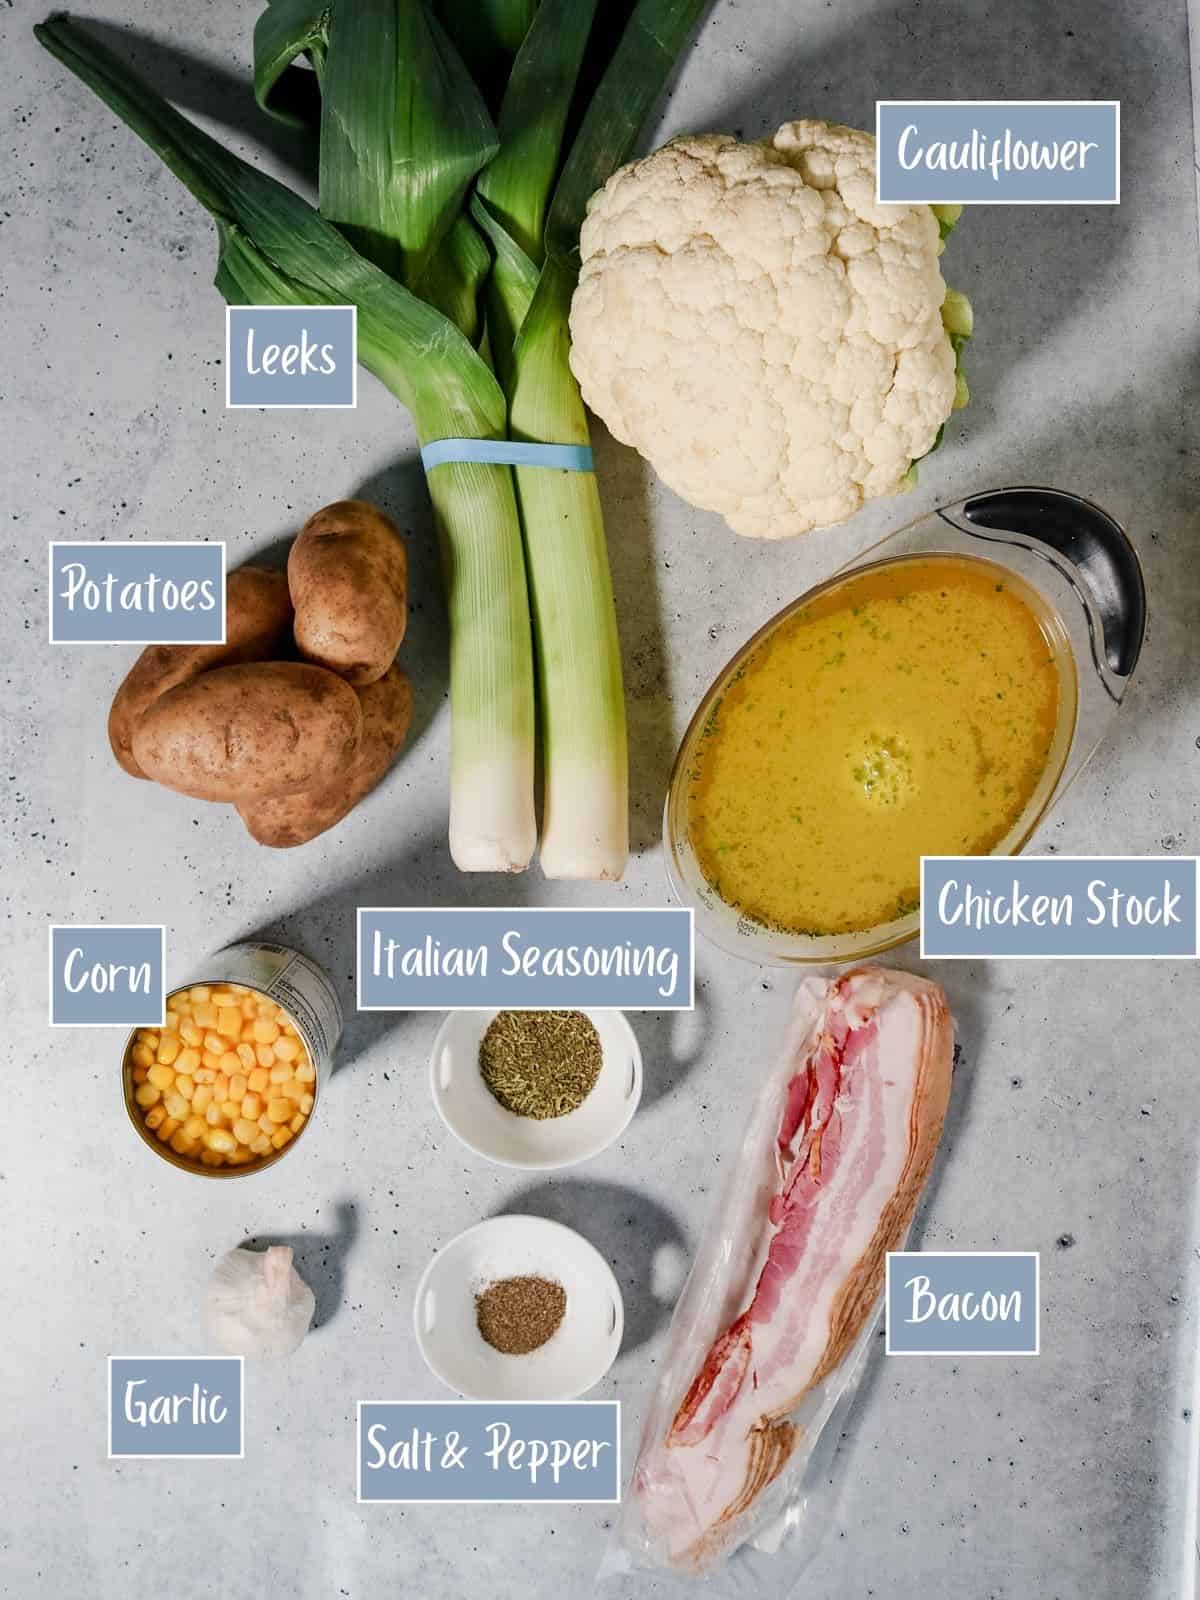 Labeled ingredients for cauliflower, leek and potato soup.